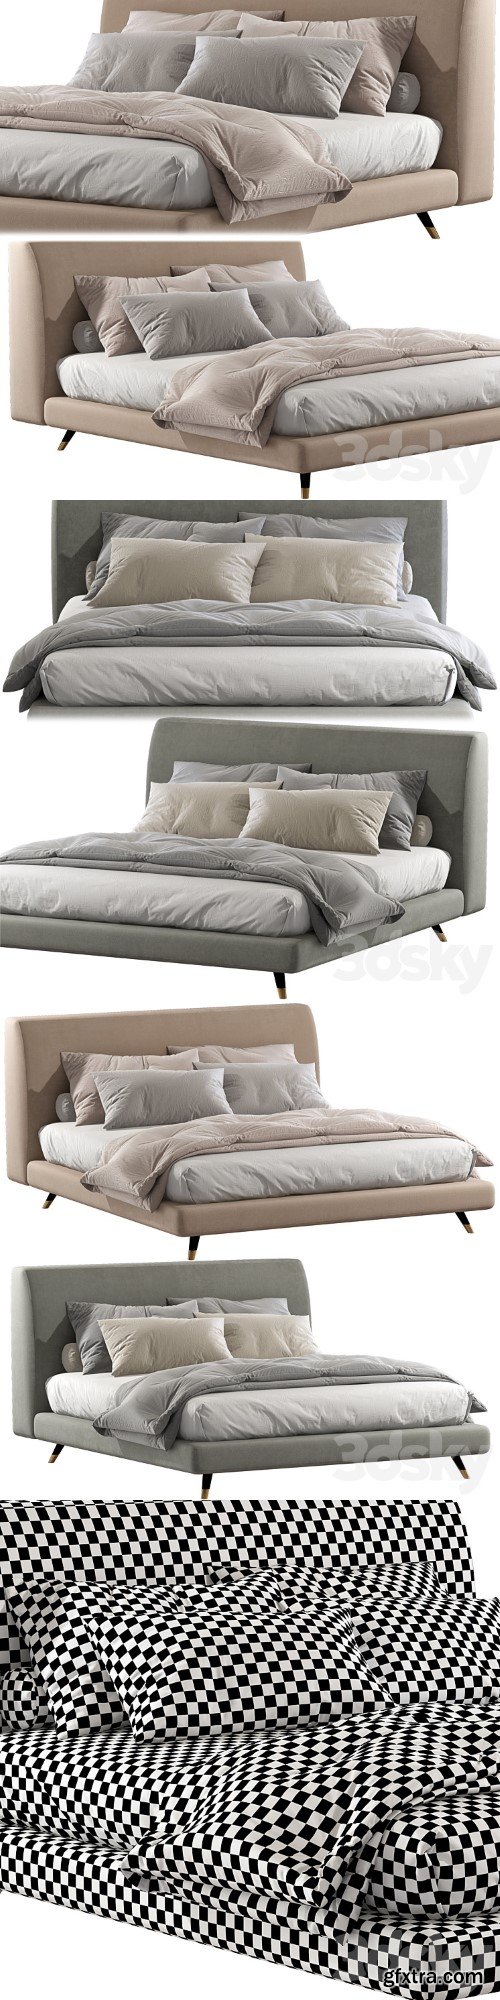 ES Double bed By Twils